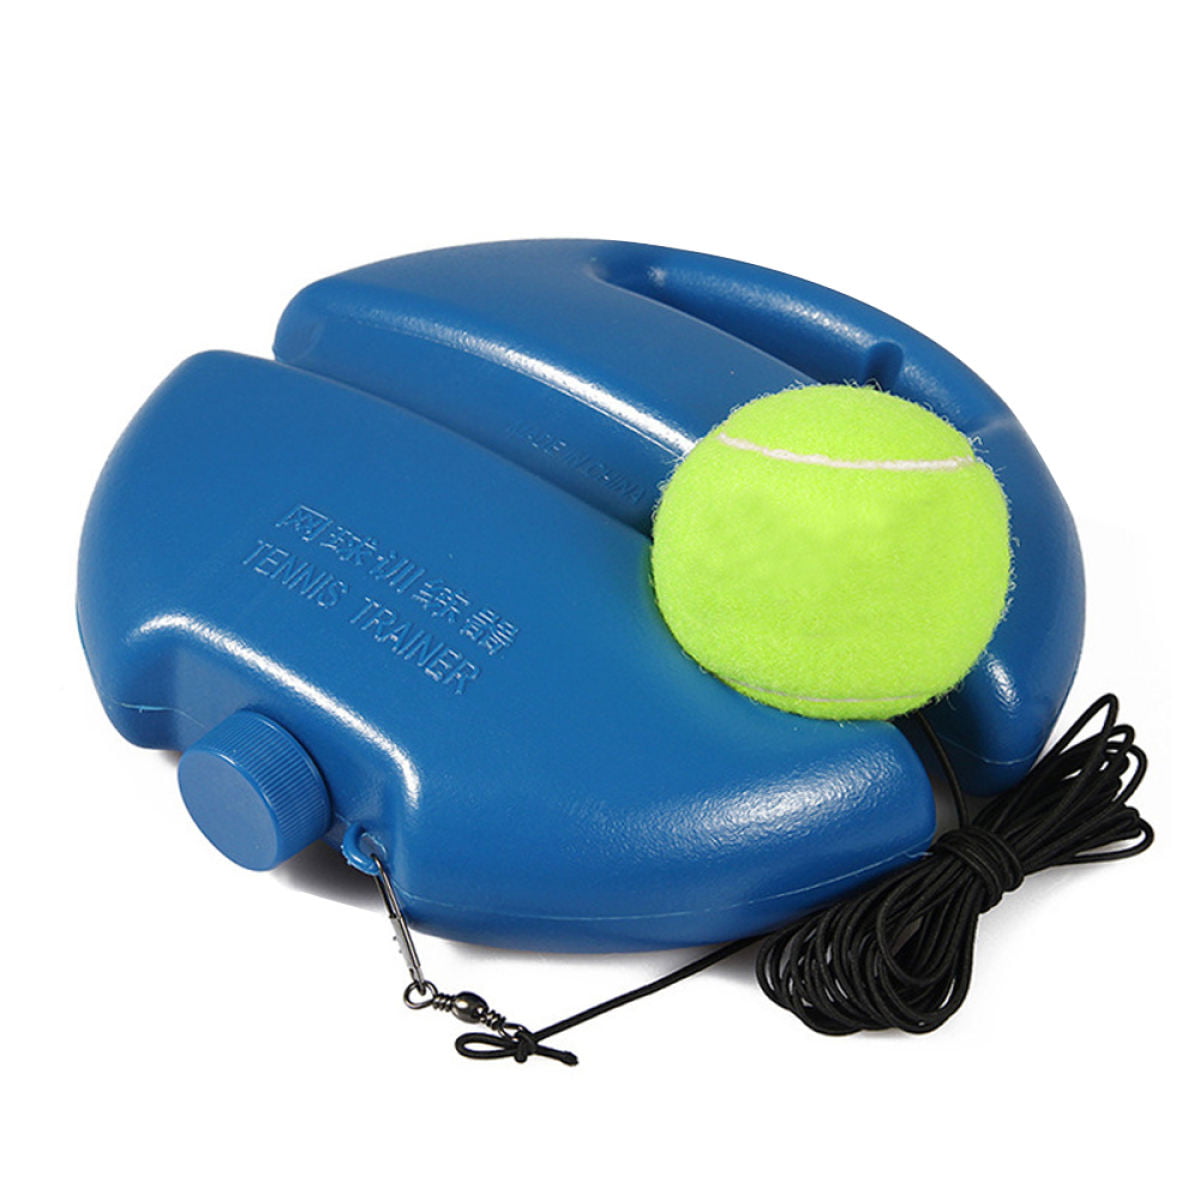 Tennis Trainer Hit Swing Self-Study Practice Tool Equipment with Ball Holder